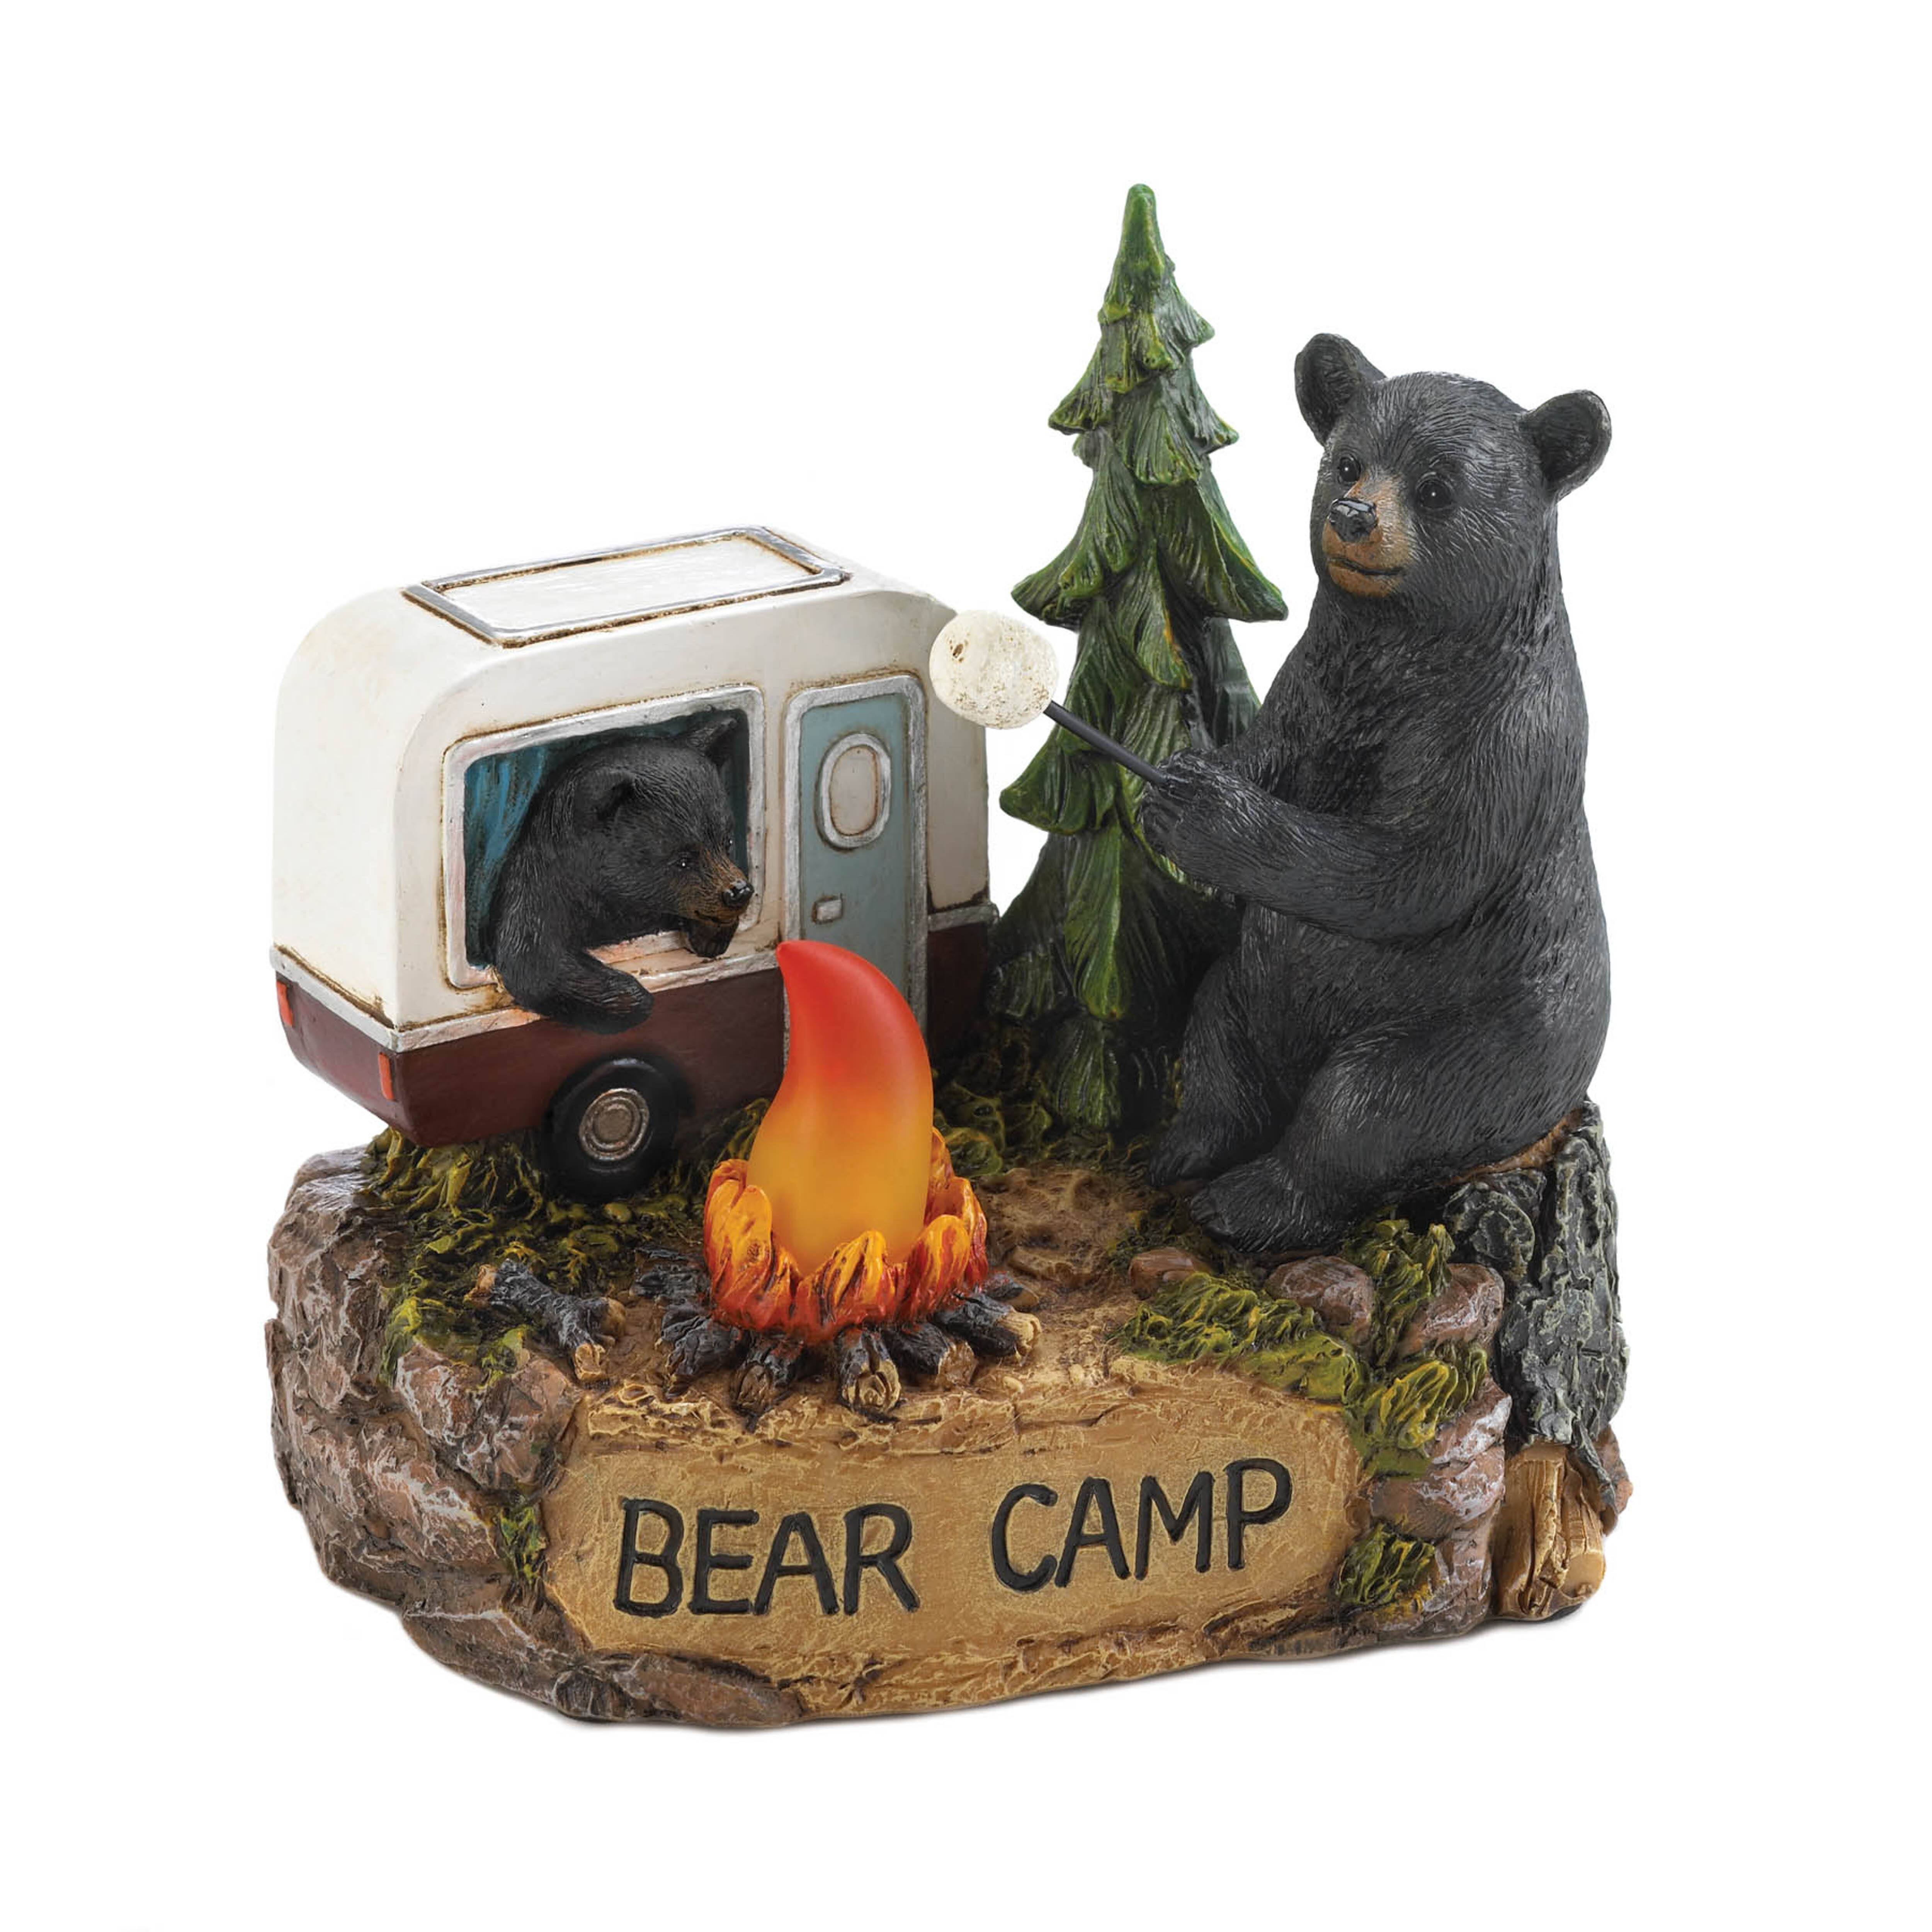 Campsite Black Bear Where Friends & Marshmallows Get Toasted SIGN Camping WALL PLAQUE 5X10 SJT 91028